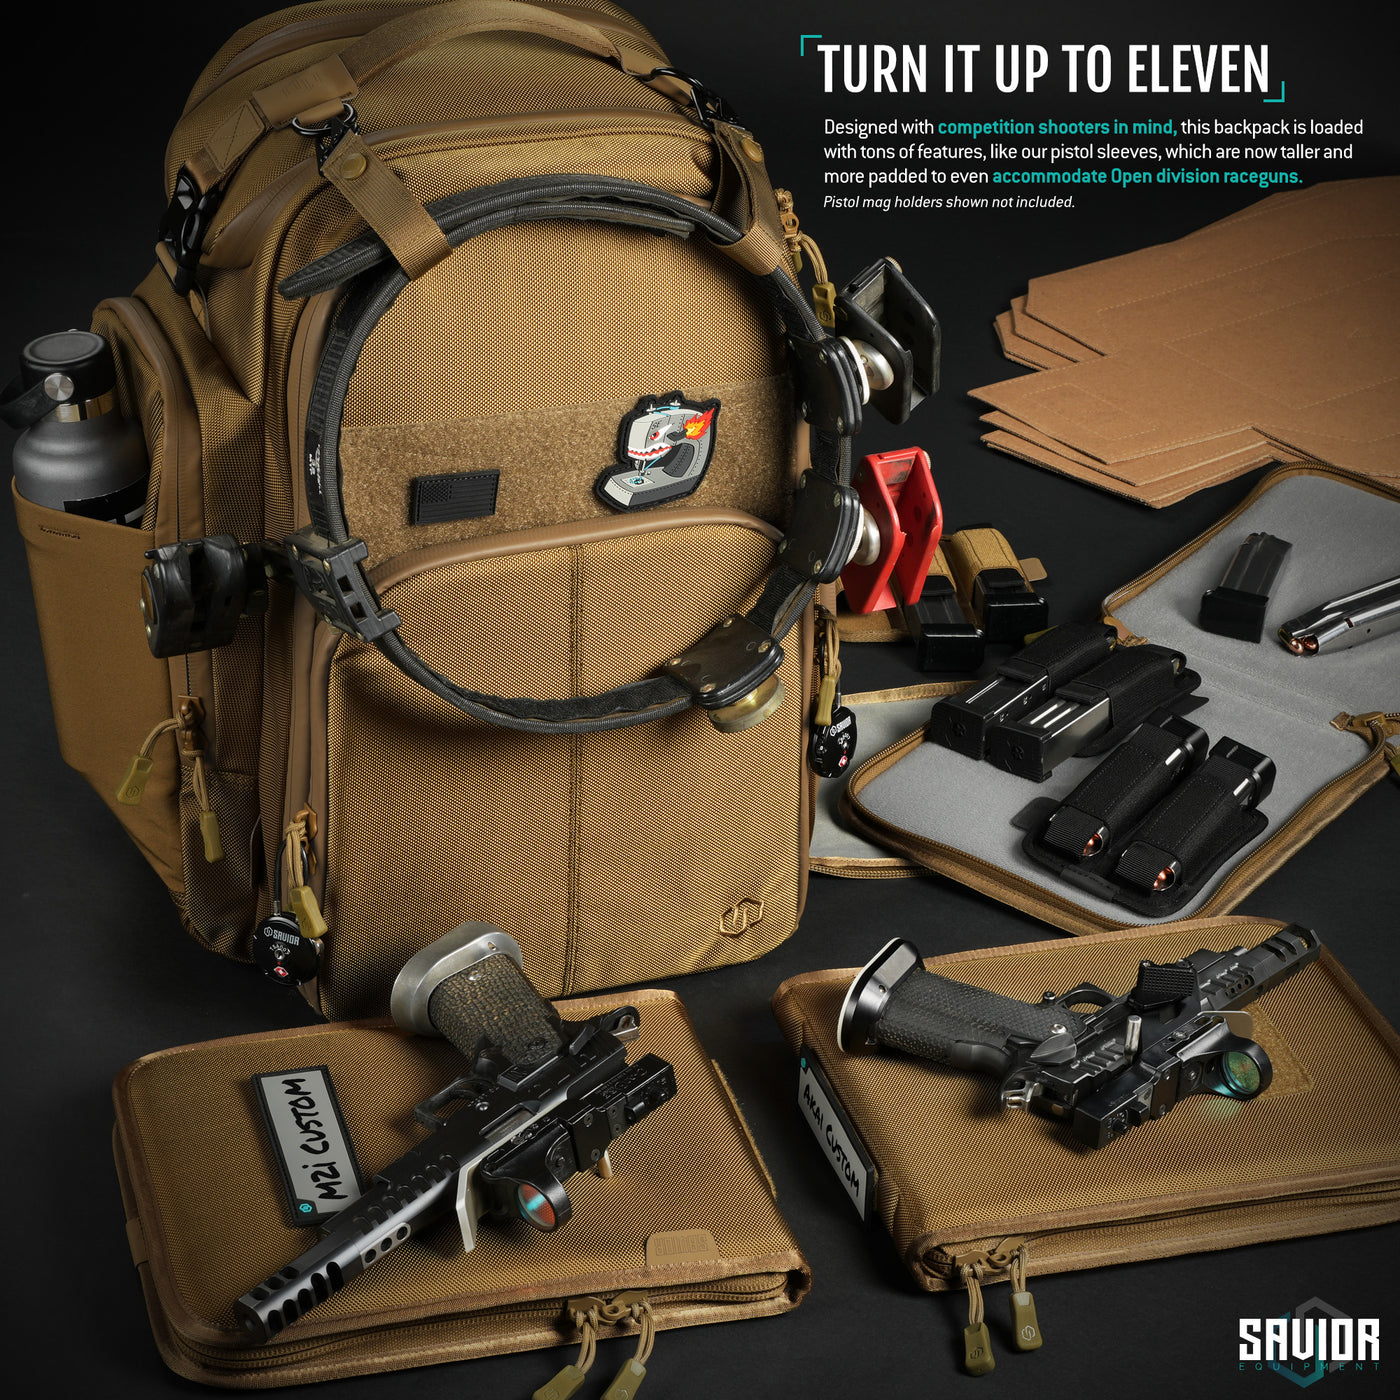 Designed with competition shooters in mind, this backpack is loaded with tons of features, like our pistol sleeves, which are now taller and more padded to even accommodate Open division raceguns.